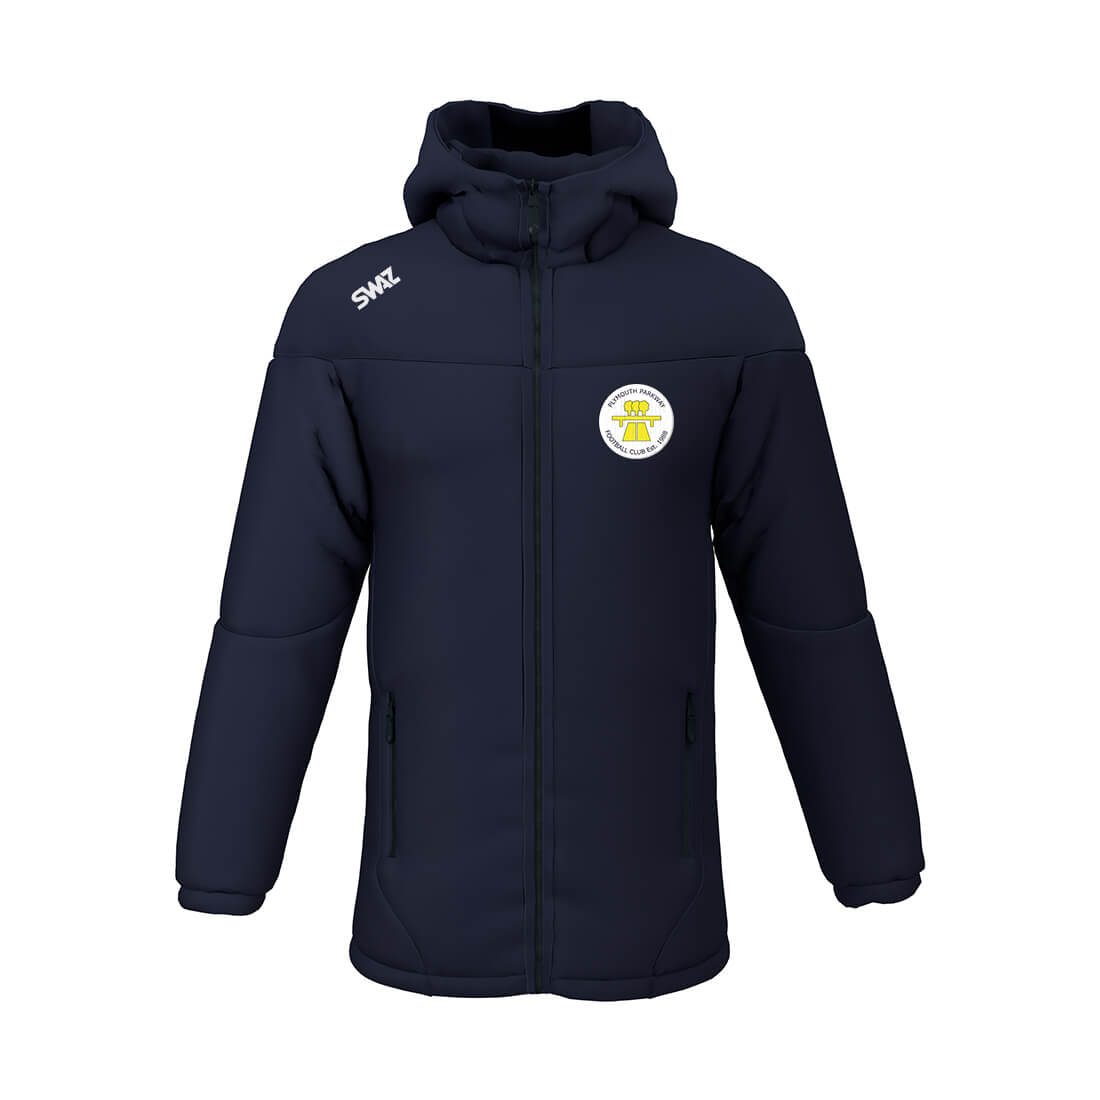 Plymouth Parkway Sideline Jacket | Football Training Kit and Teamwear